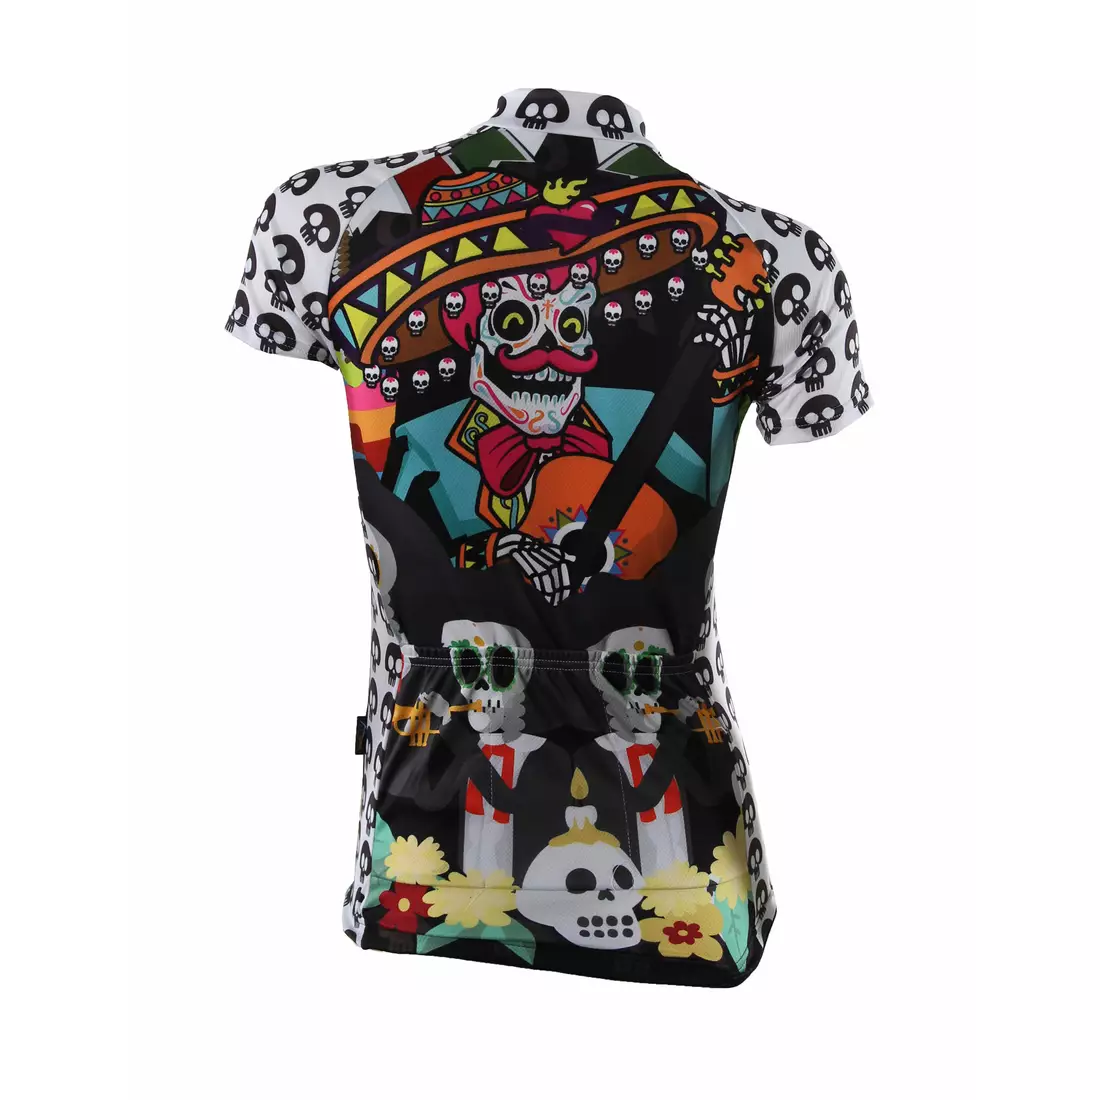 MikeSPORT DESIGN CHICANO SKULL women's cycling jersey